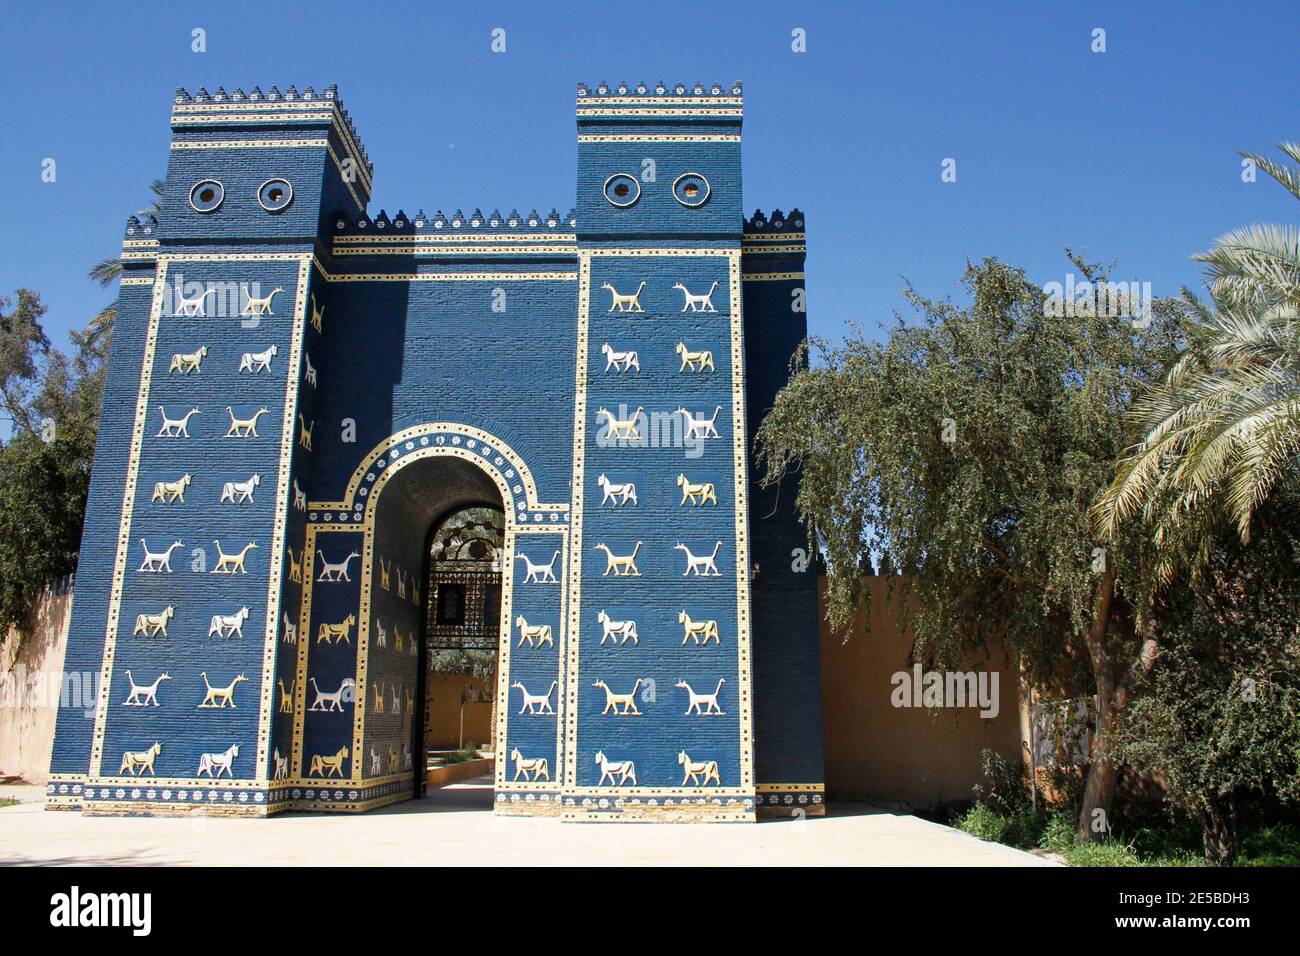 Replica of the Ishtar gate at the entrance of Babylon, Iraq. Stock Photo